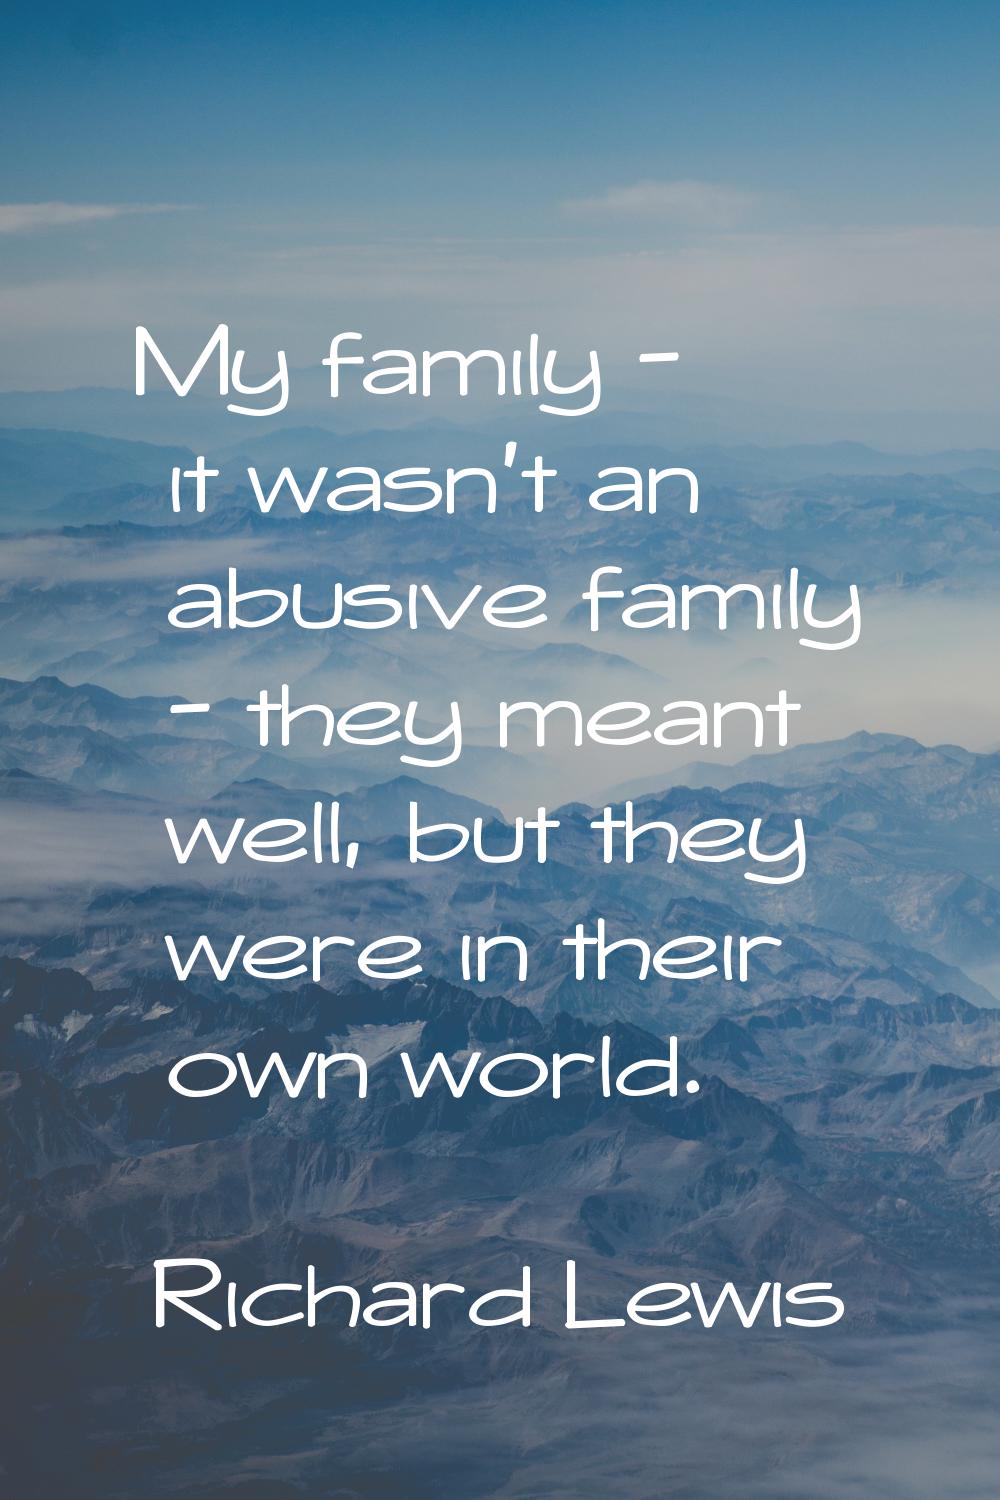 My family - it wasn't an abusive family - they meant well, but they were in their own world.